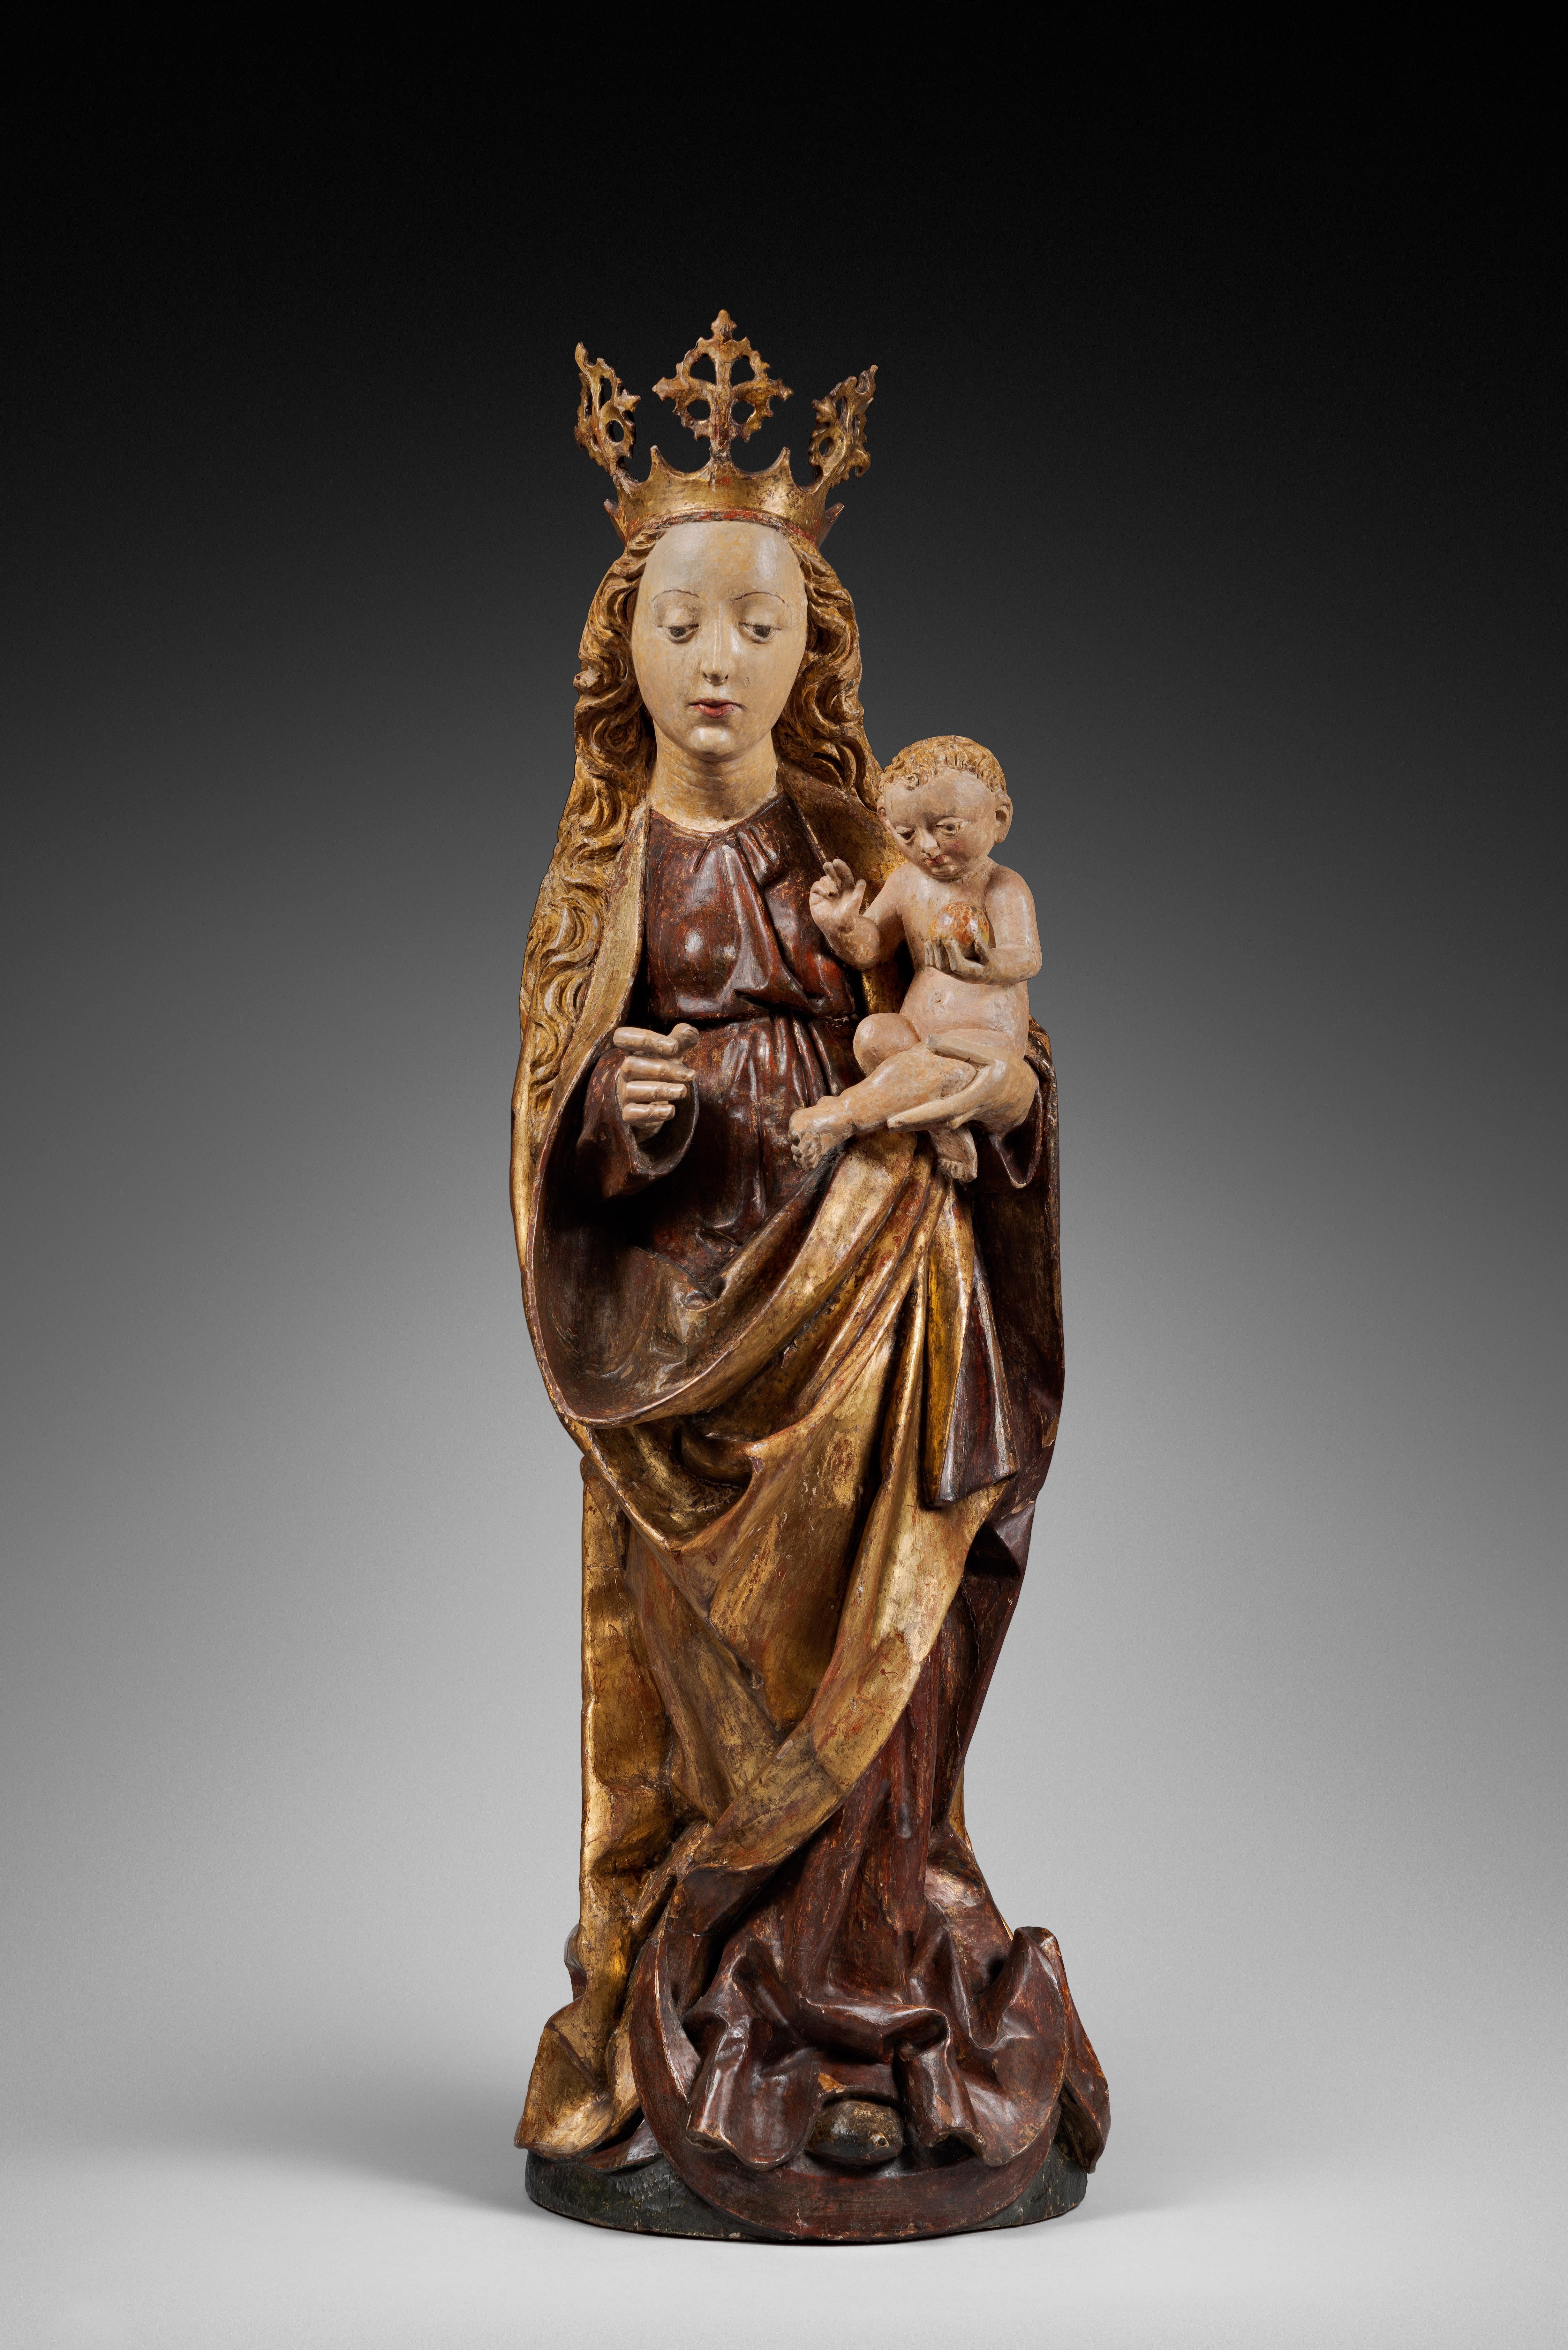 POLYCHROME CARVED WOOD VIRGIN AND CHILD FROM THE 15TH CENTURY
 
ORIGIN: SOUTH GERMANY, SWABIA, NUREMBERG REGION
PERIOD: 15th CENTURY
 
Height: 94,6cm
Width : 28 cm
Depth : 18 cm
 
Lime wood
Original Polychromy
Good state of conservation
 
 
From